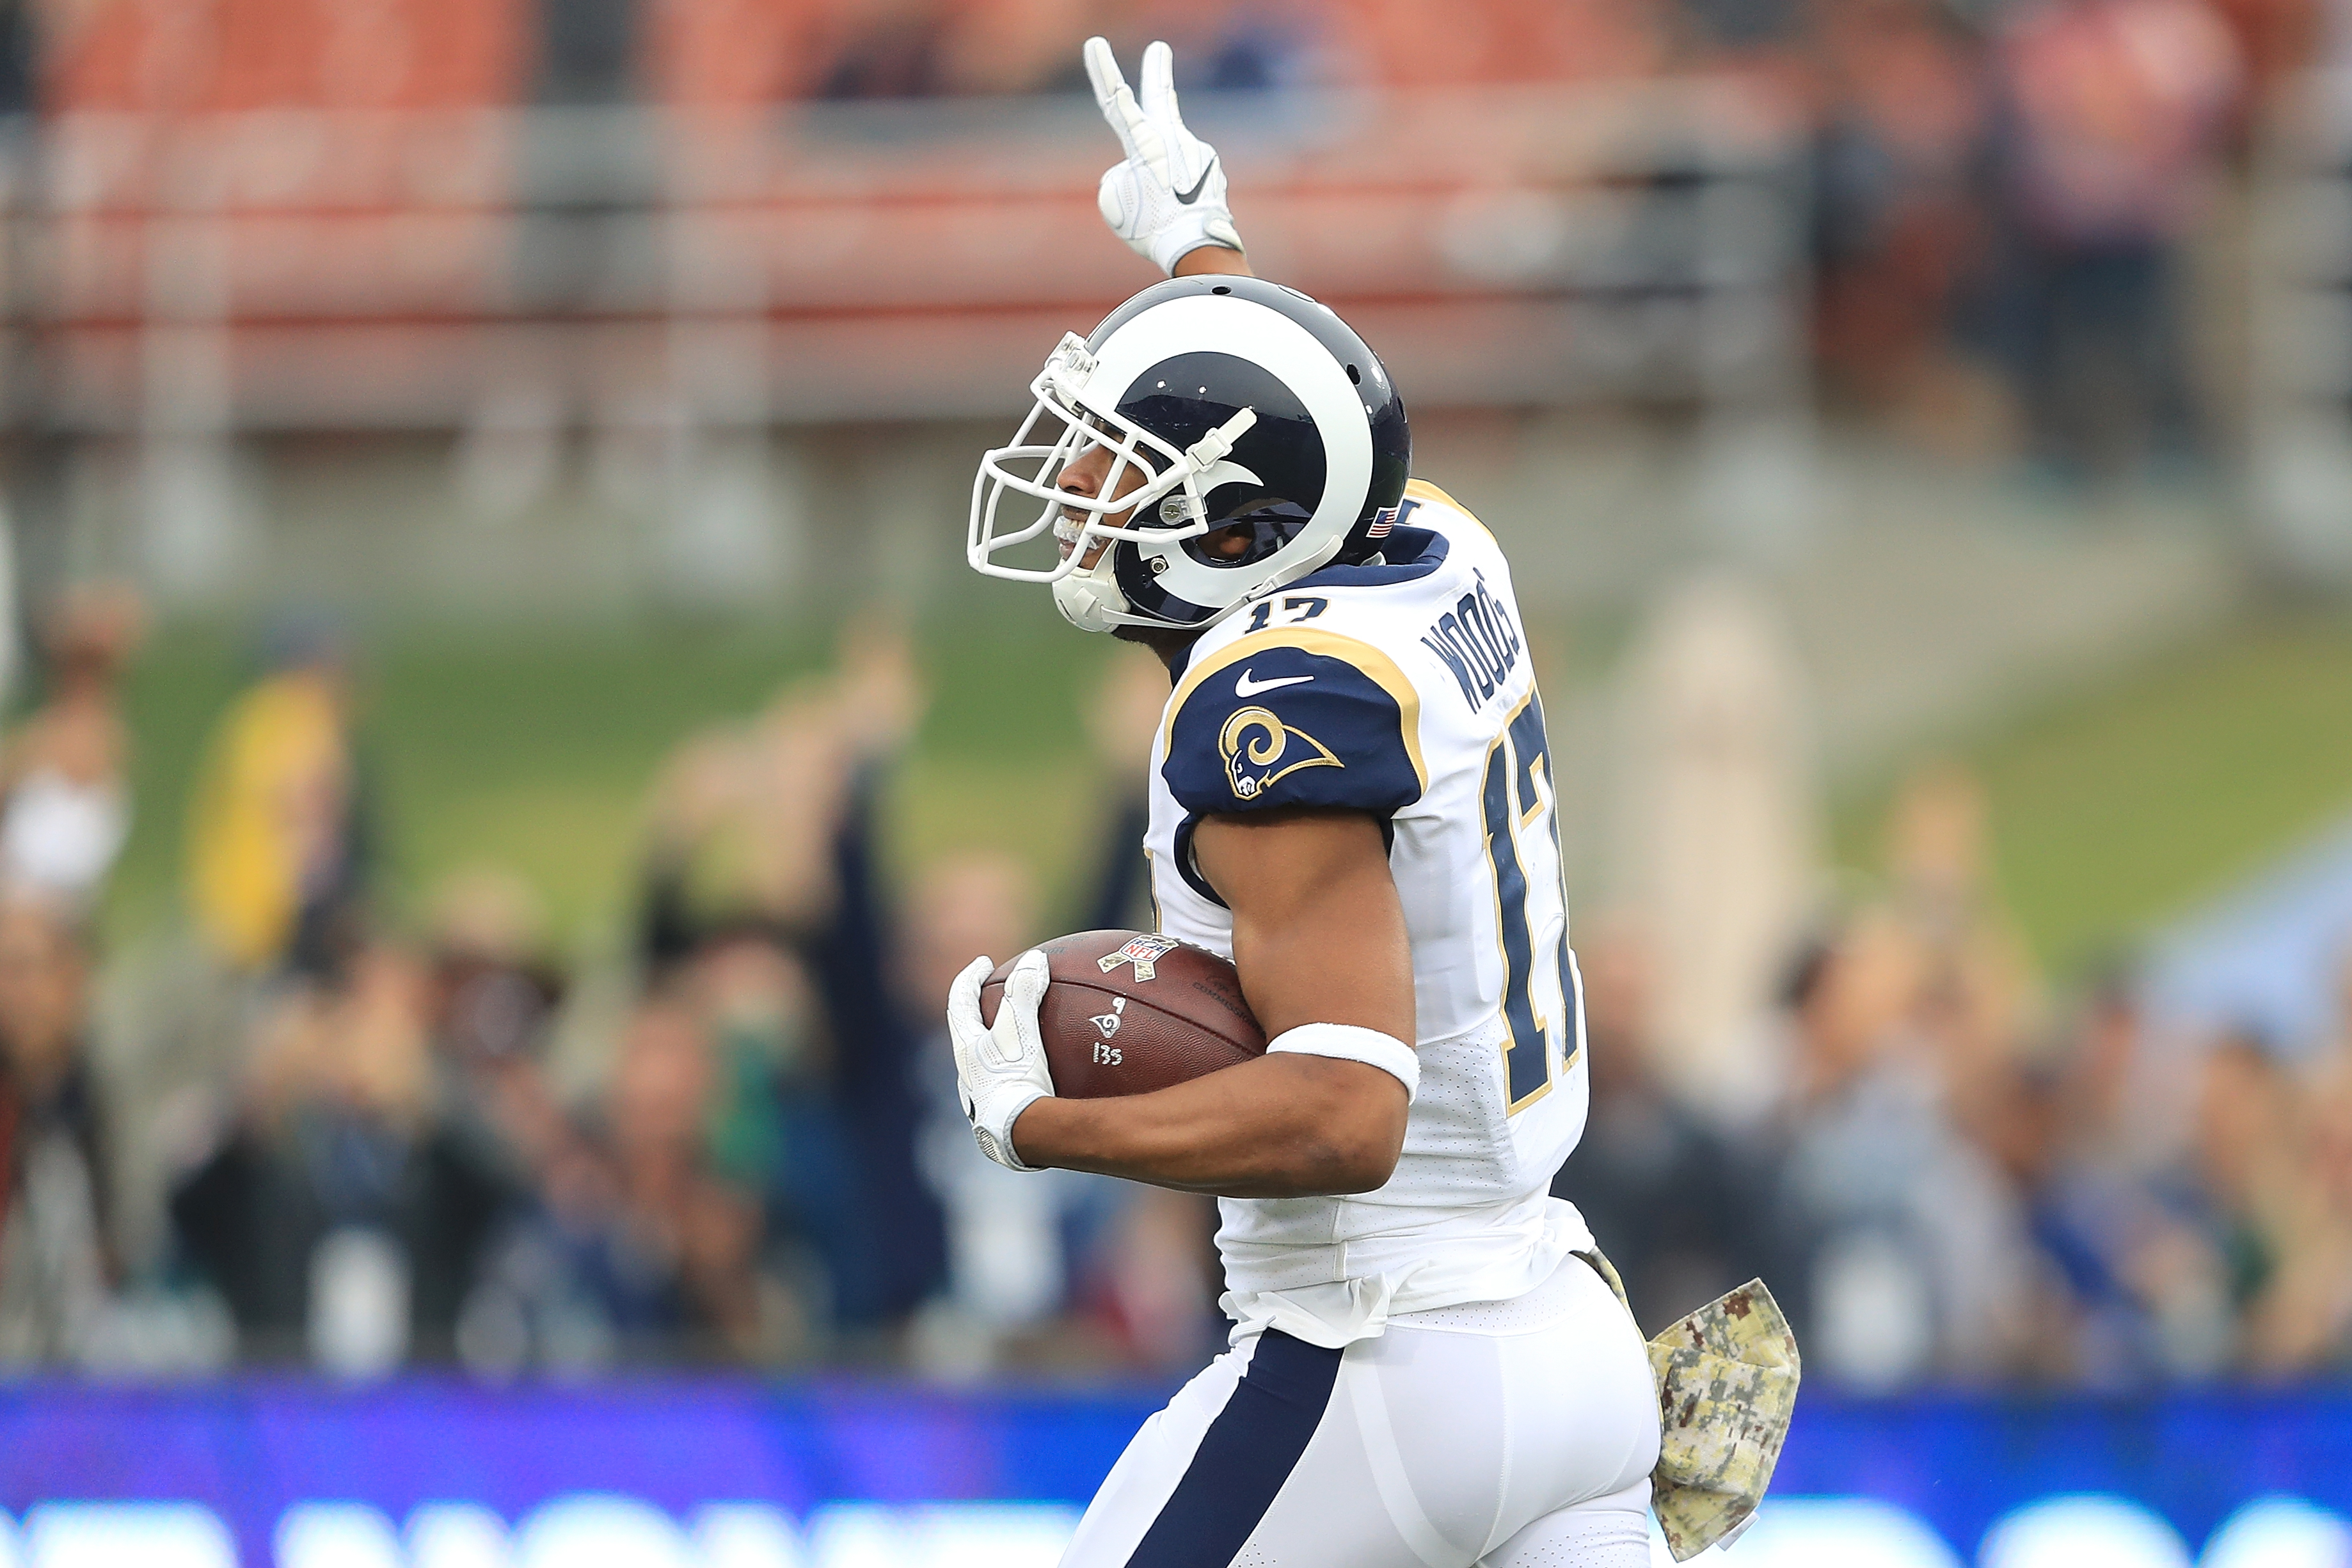 Ranking the 5 best moments of the Rams' 2017 season